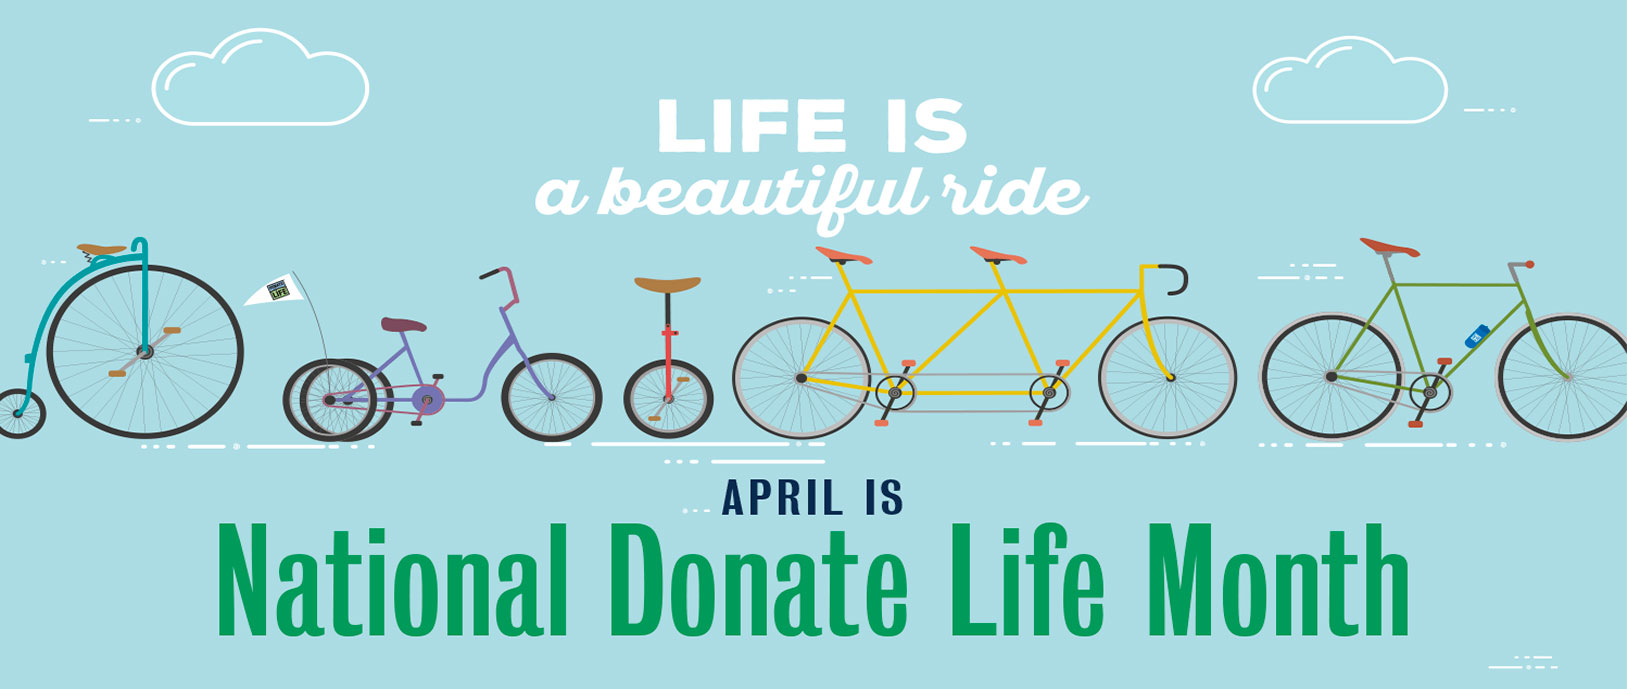 Life is a beautiful ride
April is National Donate Life Month